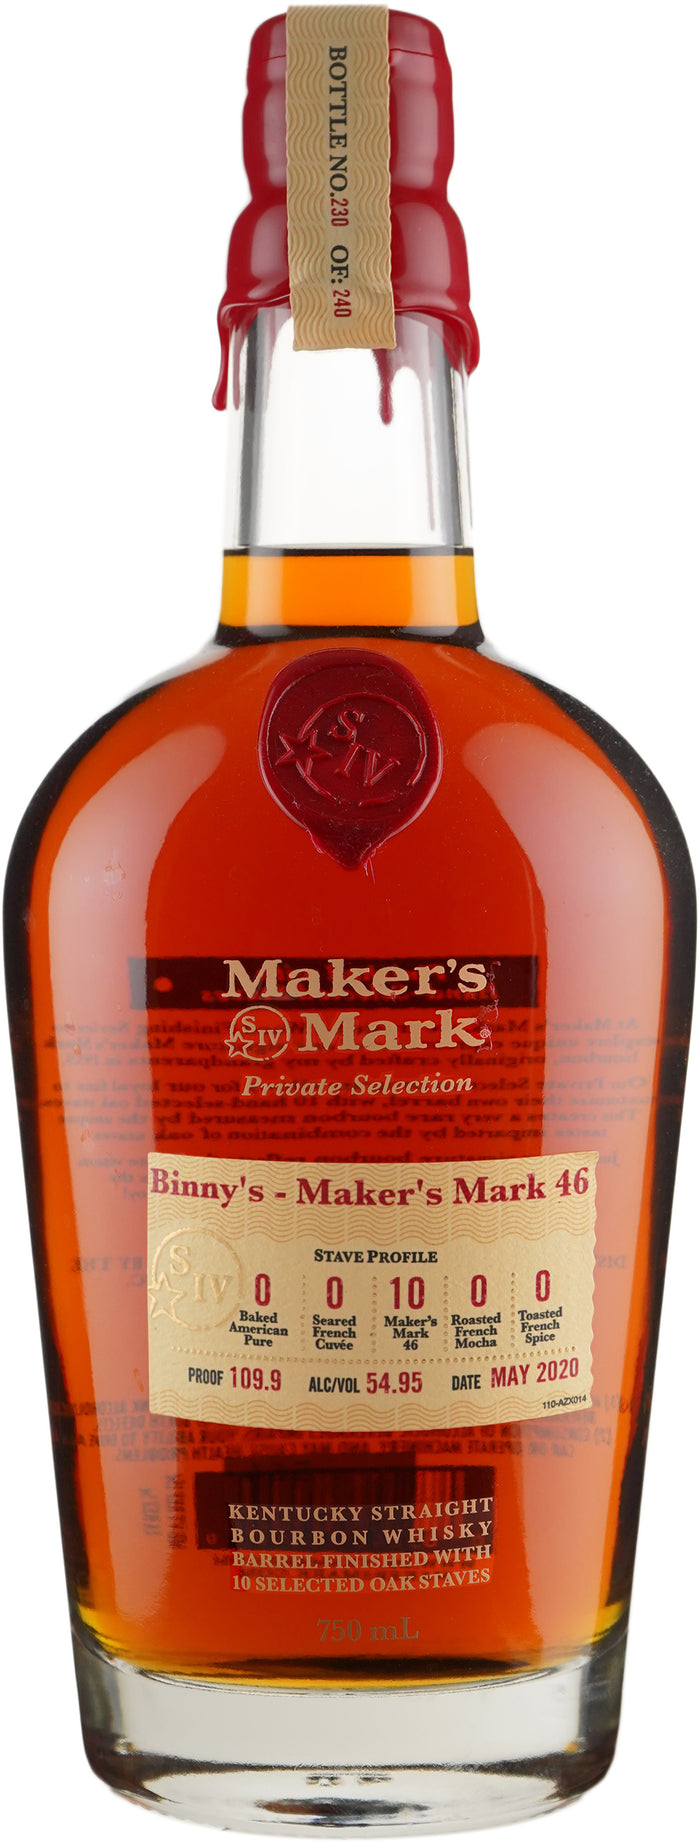 Maker's Mark Private Select 46 Single Stave Barrel # 3073 Whiskey